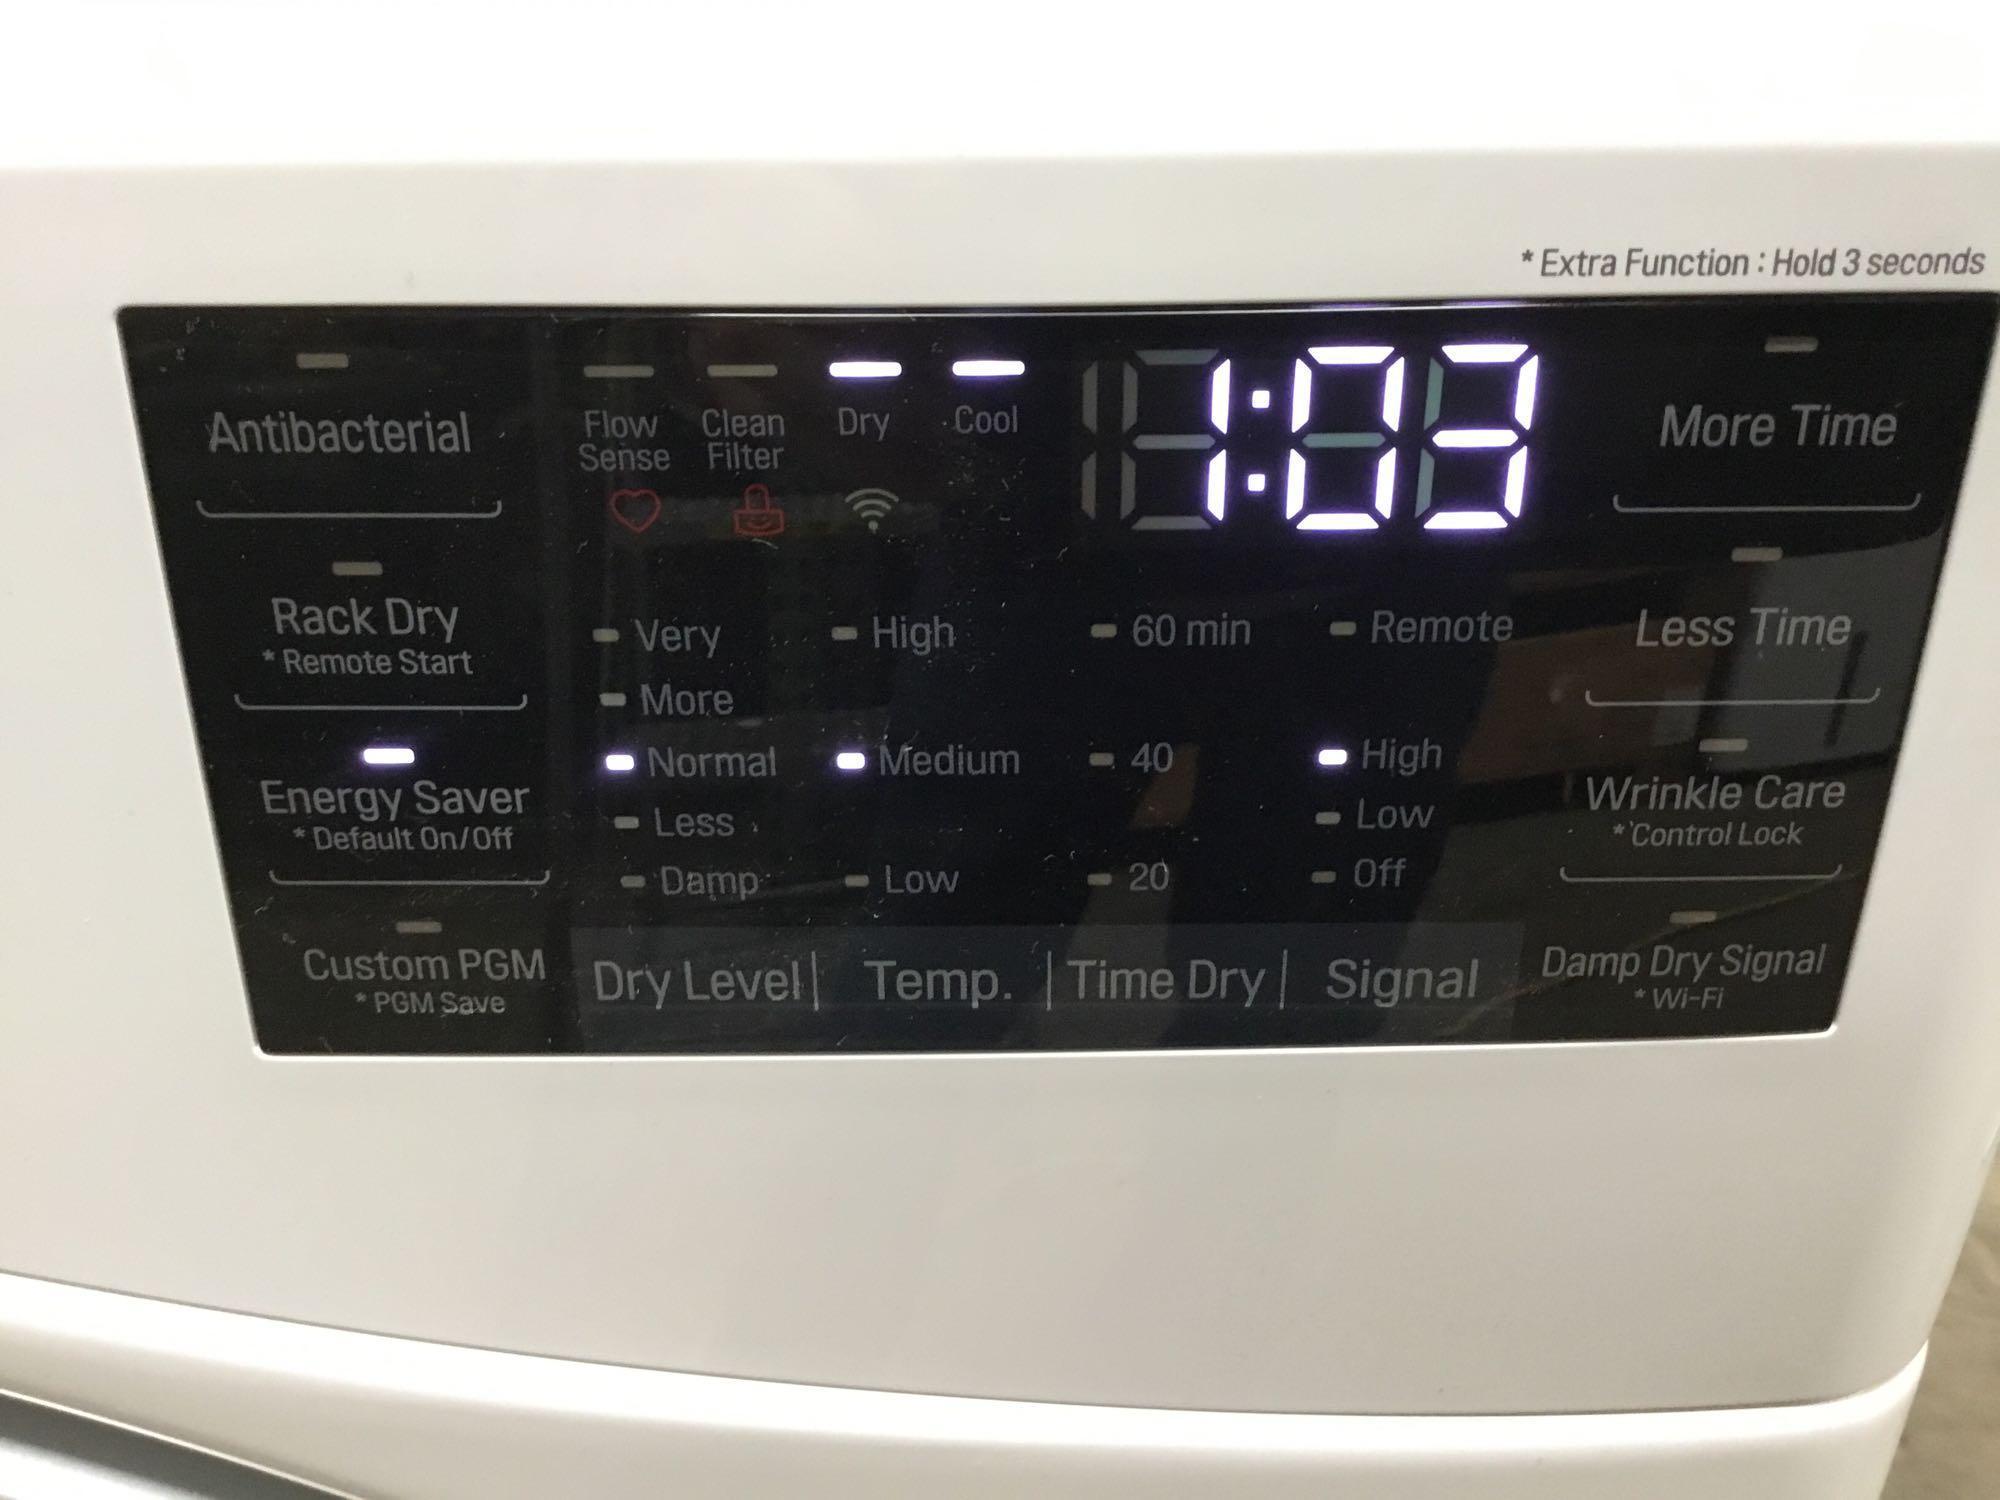 LG 7.4 cu. ft. Front Load Gas Dryer w/Sensor Dry, and Wi-Fi Connectivity ***TURNS ON***